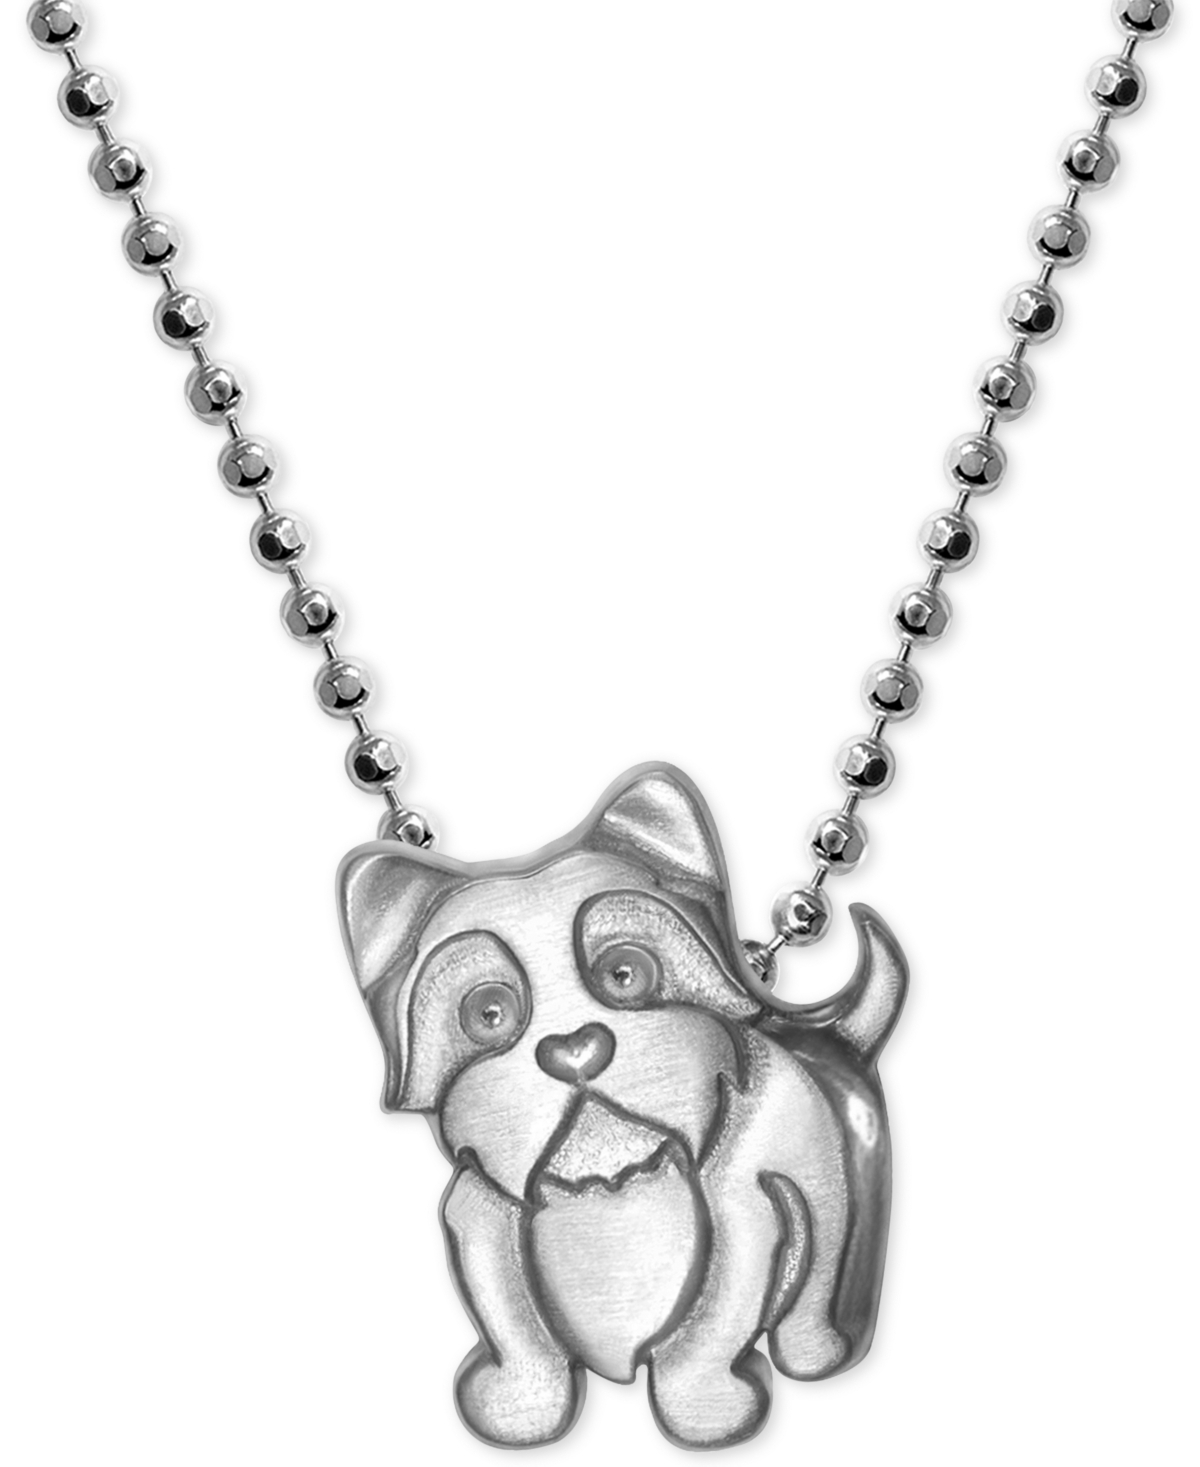 Yorkie Pendant Necklace in Sterling Silver - Sterling Silver